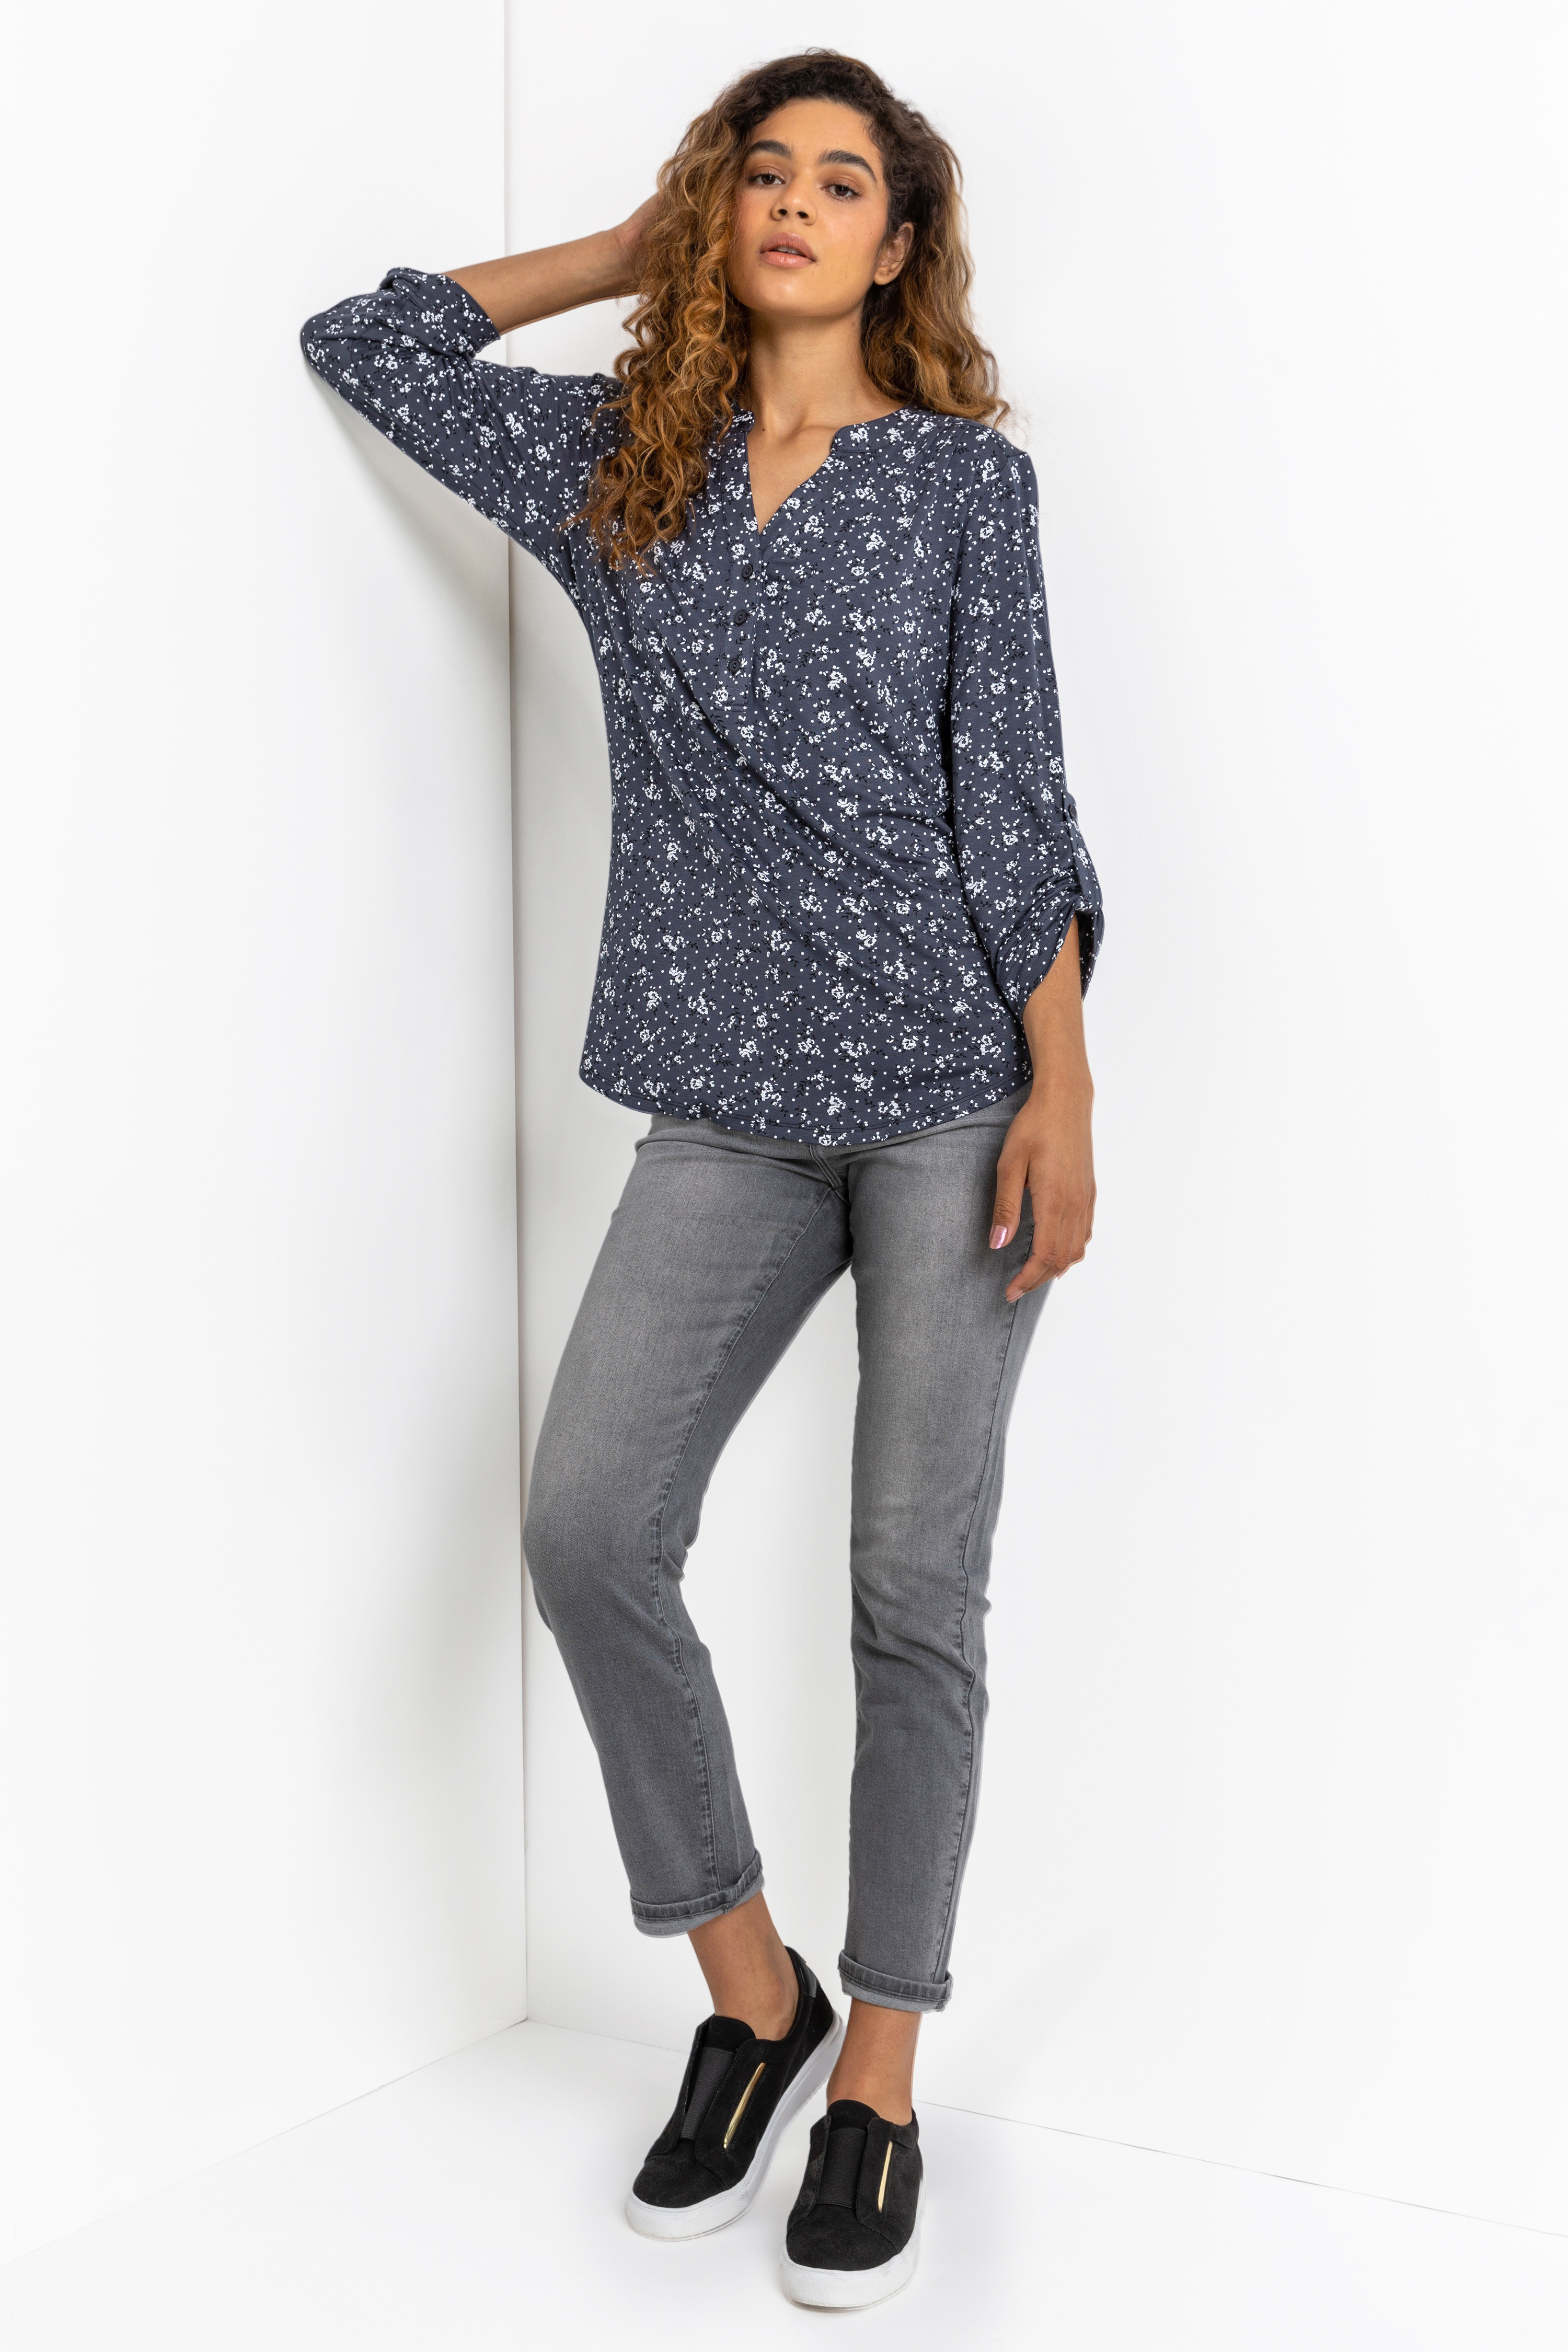 Blue & Grey Ditsy Floral Notch Neck Top, Image 3 of 5